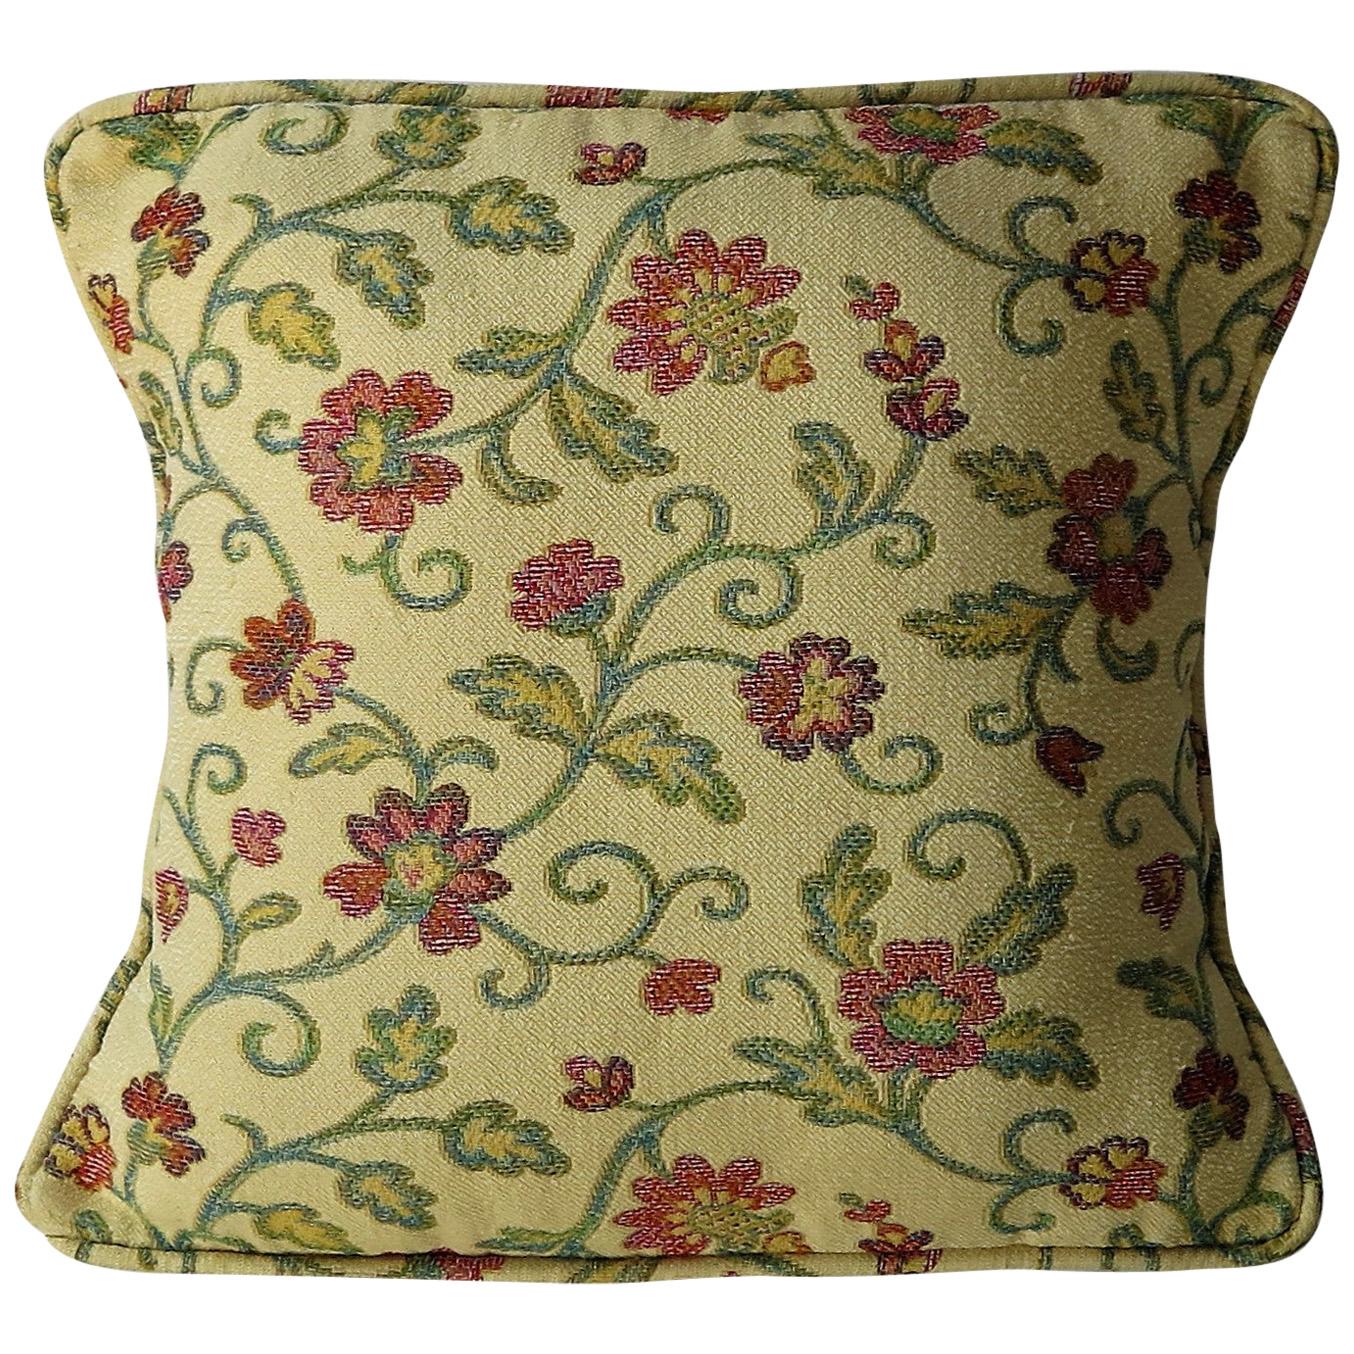 Woven Cushion or Pillow in Art Nouveau Floral Vine Style, 20th Century